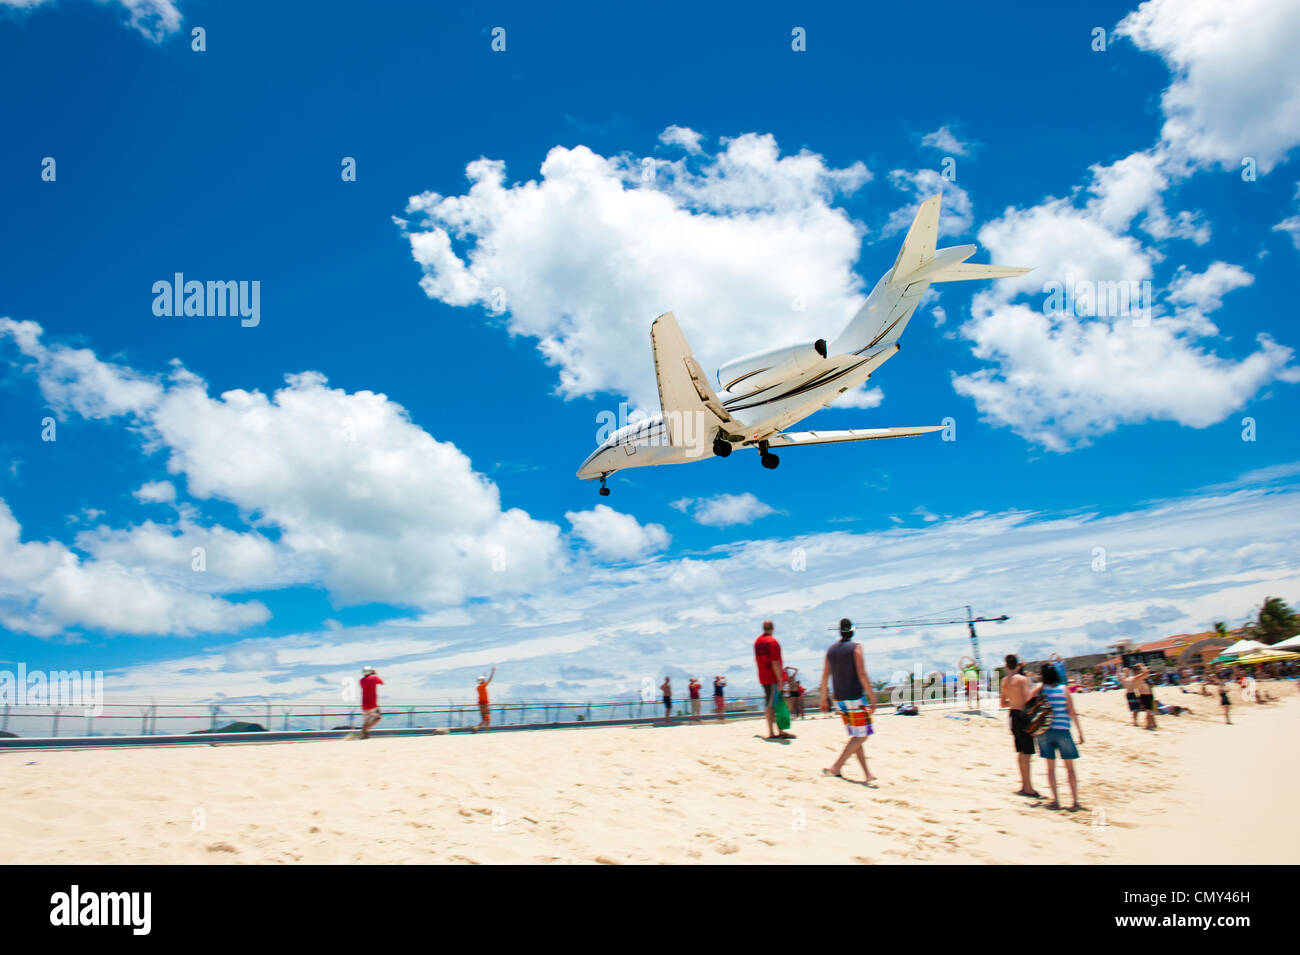 A large airplane landing on a remote island for a vacation. Stock Photo